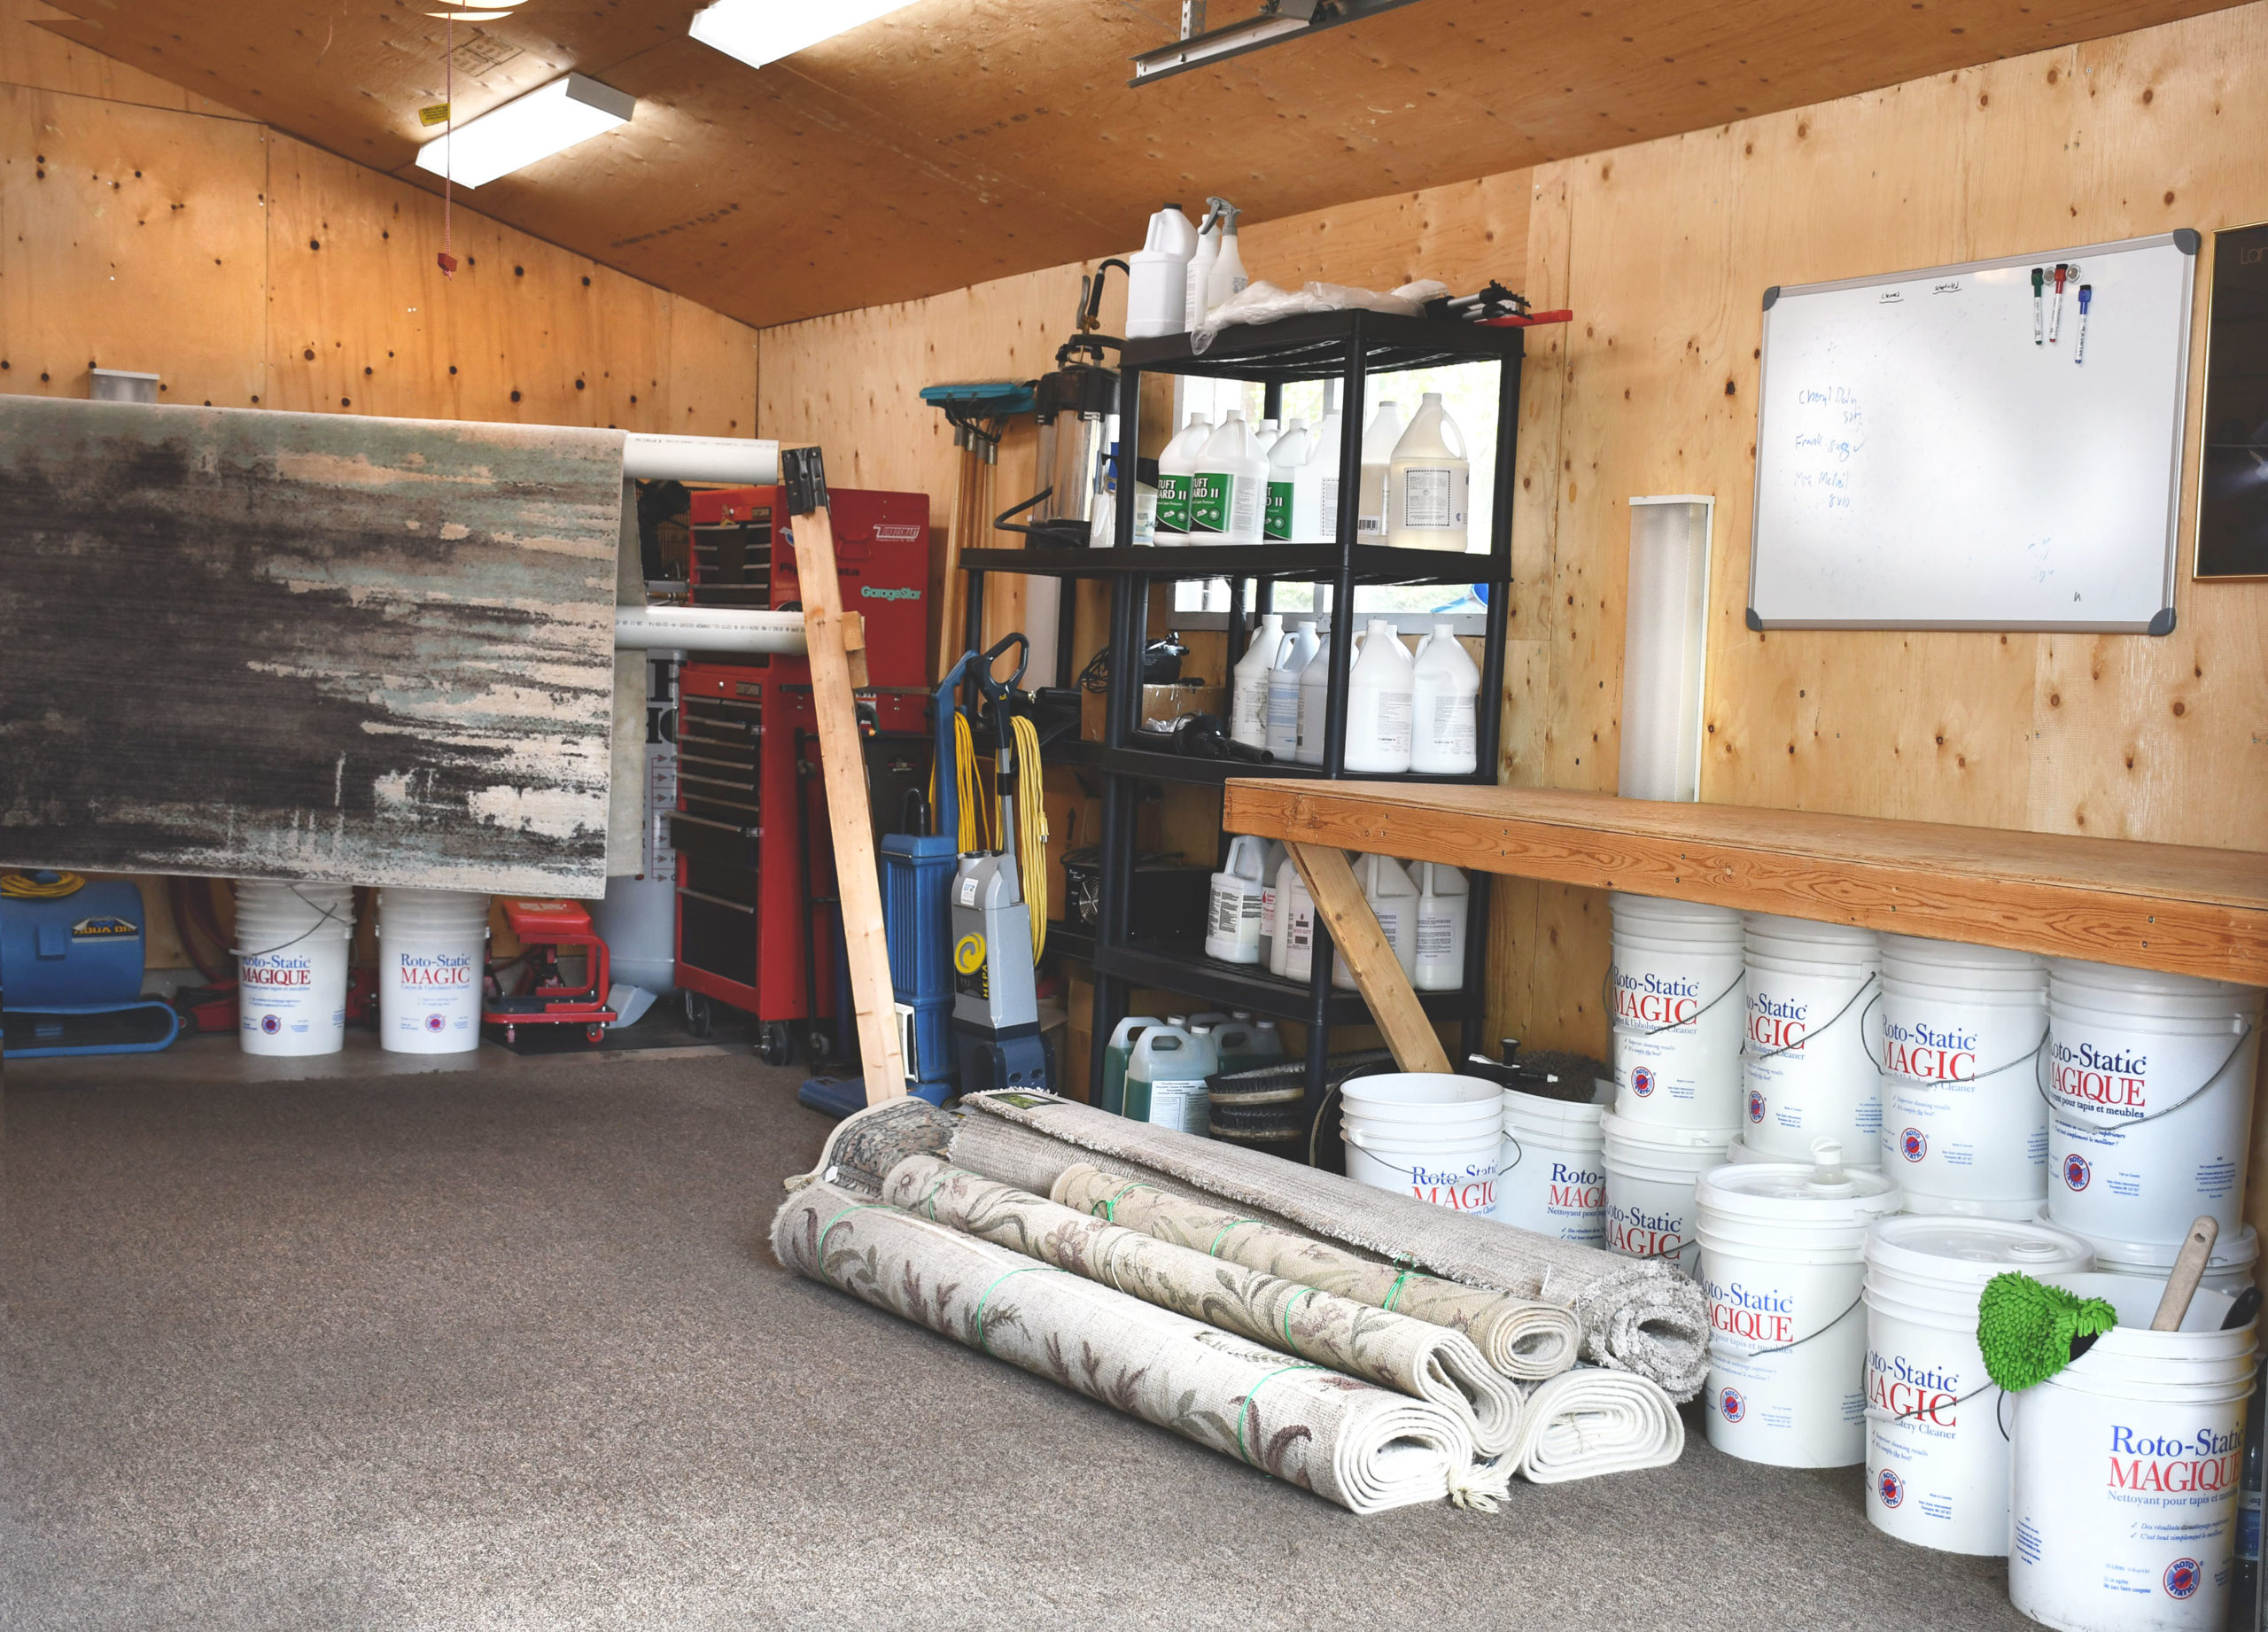 Rotostatic area rug shop filled with rugs, chemicals, and cleaning equipment